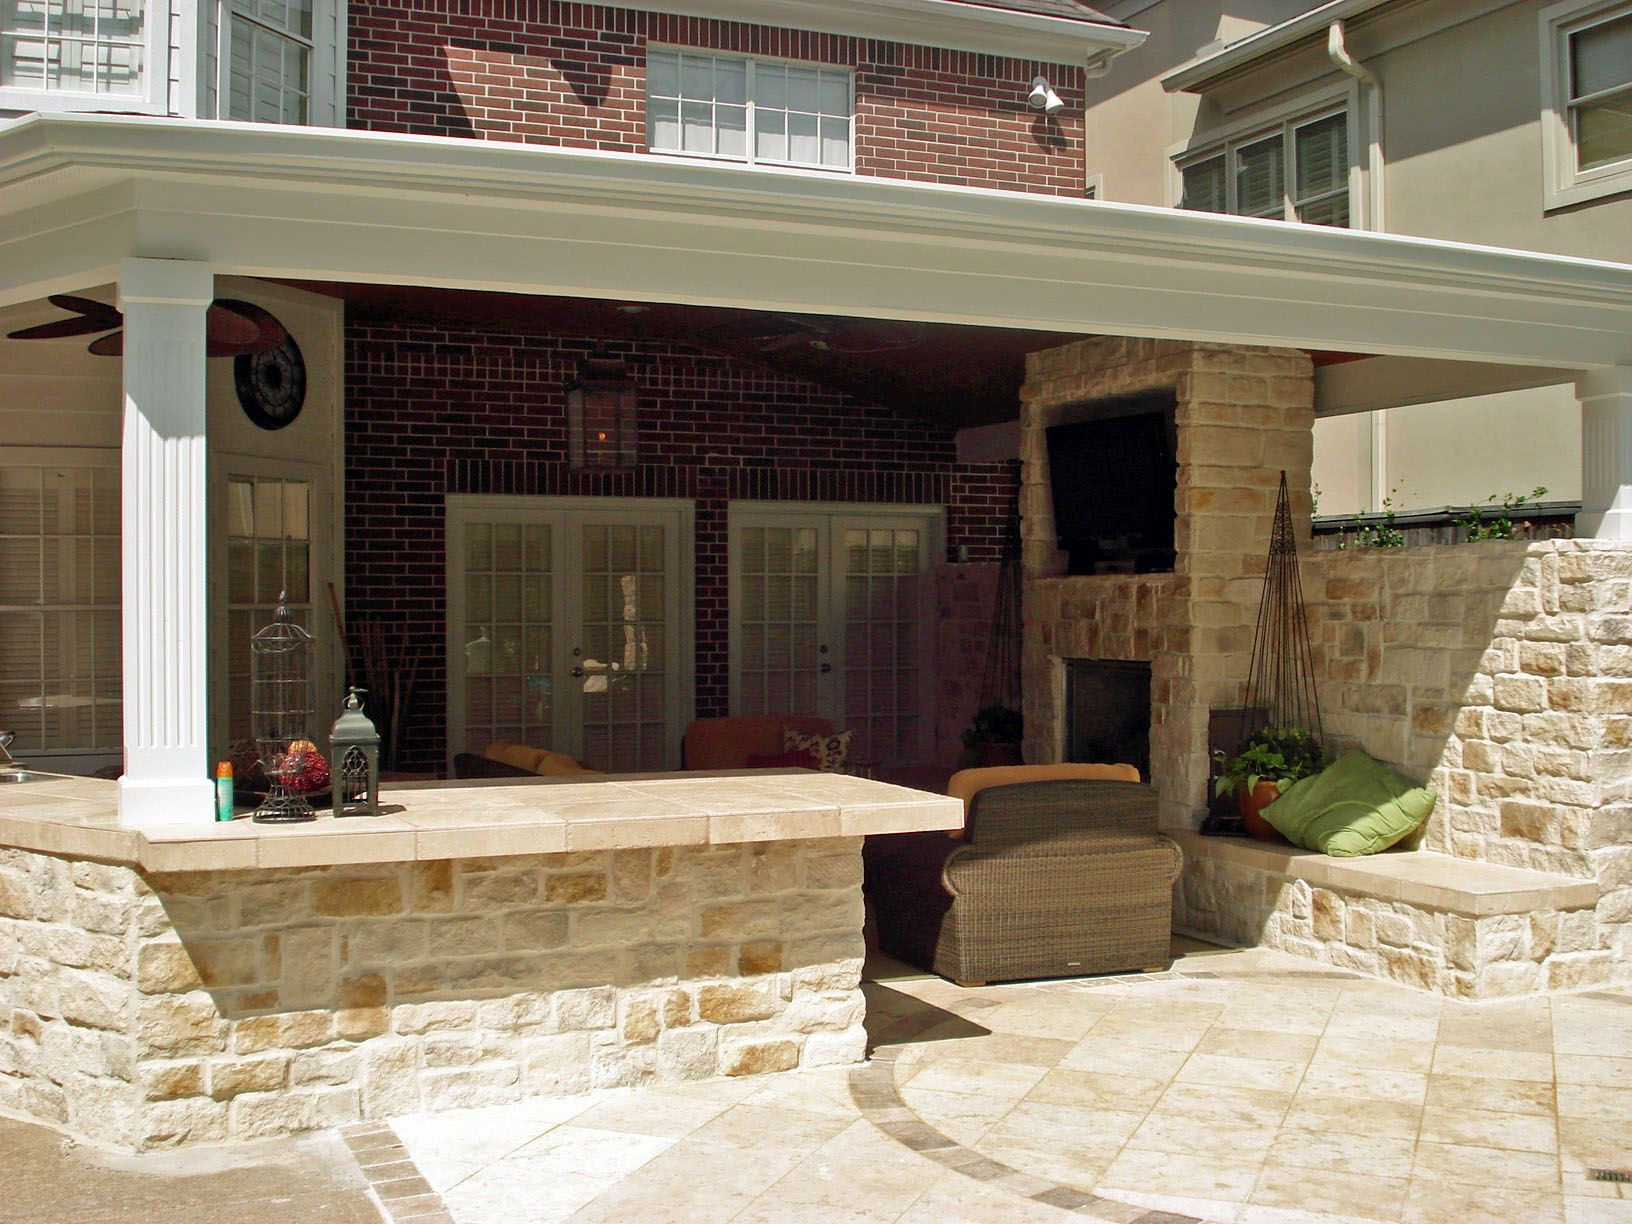 Outdoor Kitchen Covered Patio
 outdoor kitchen with covered patio